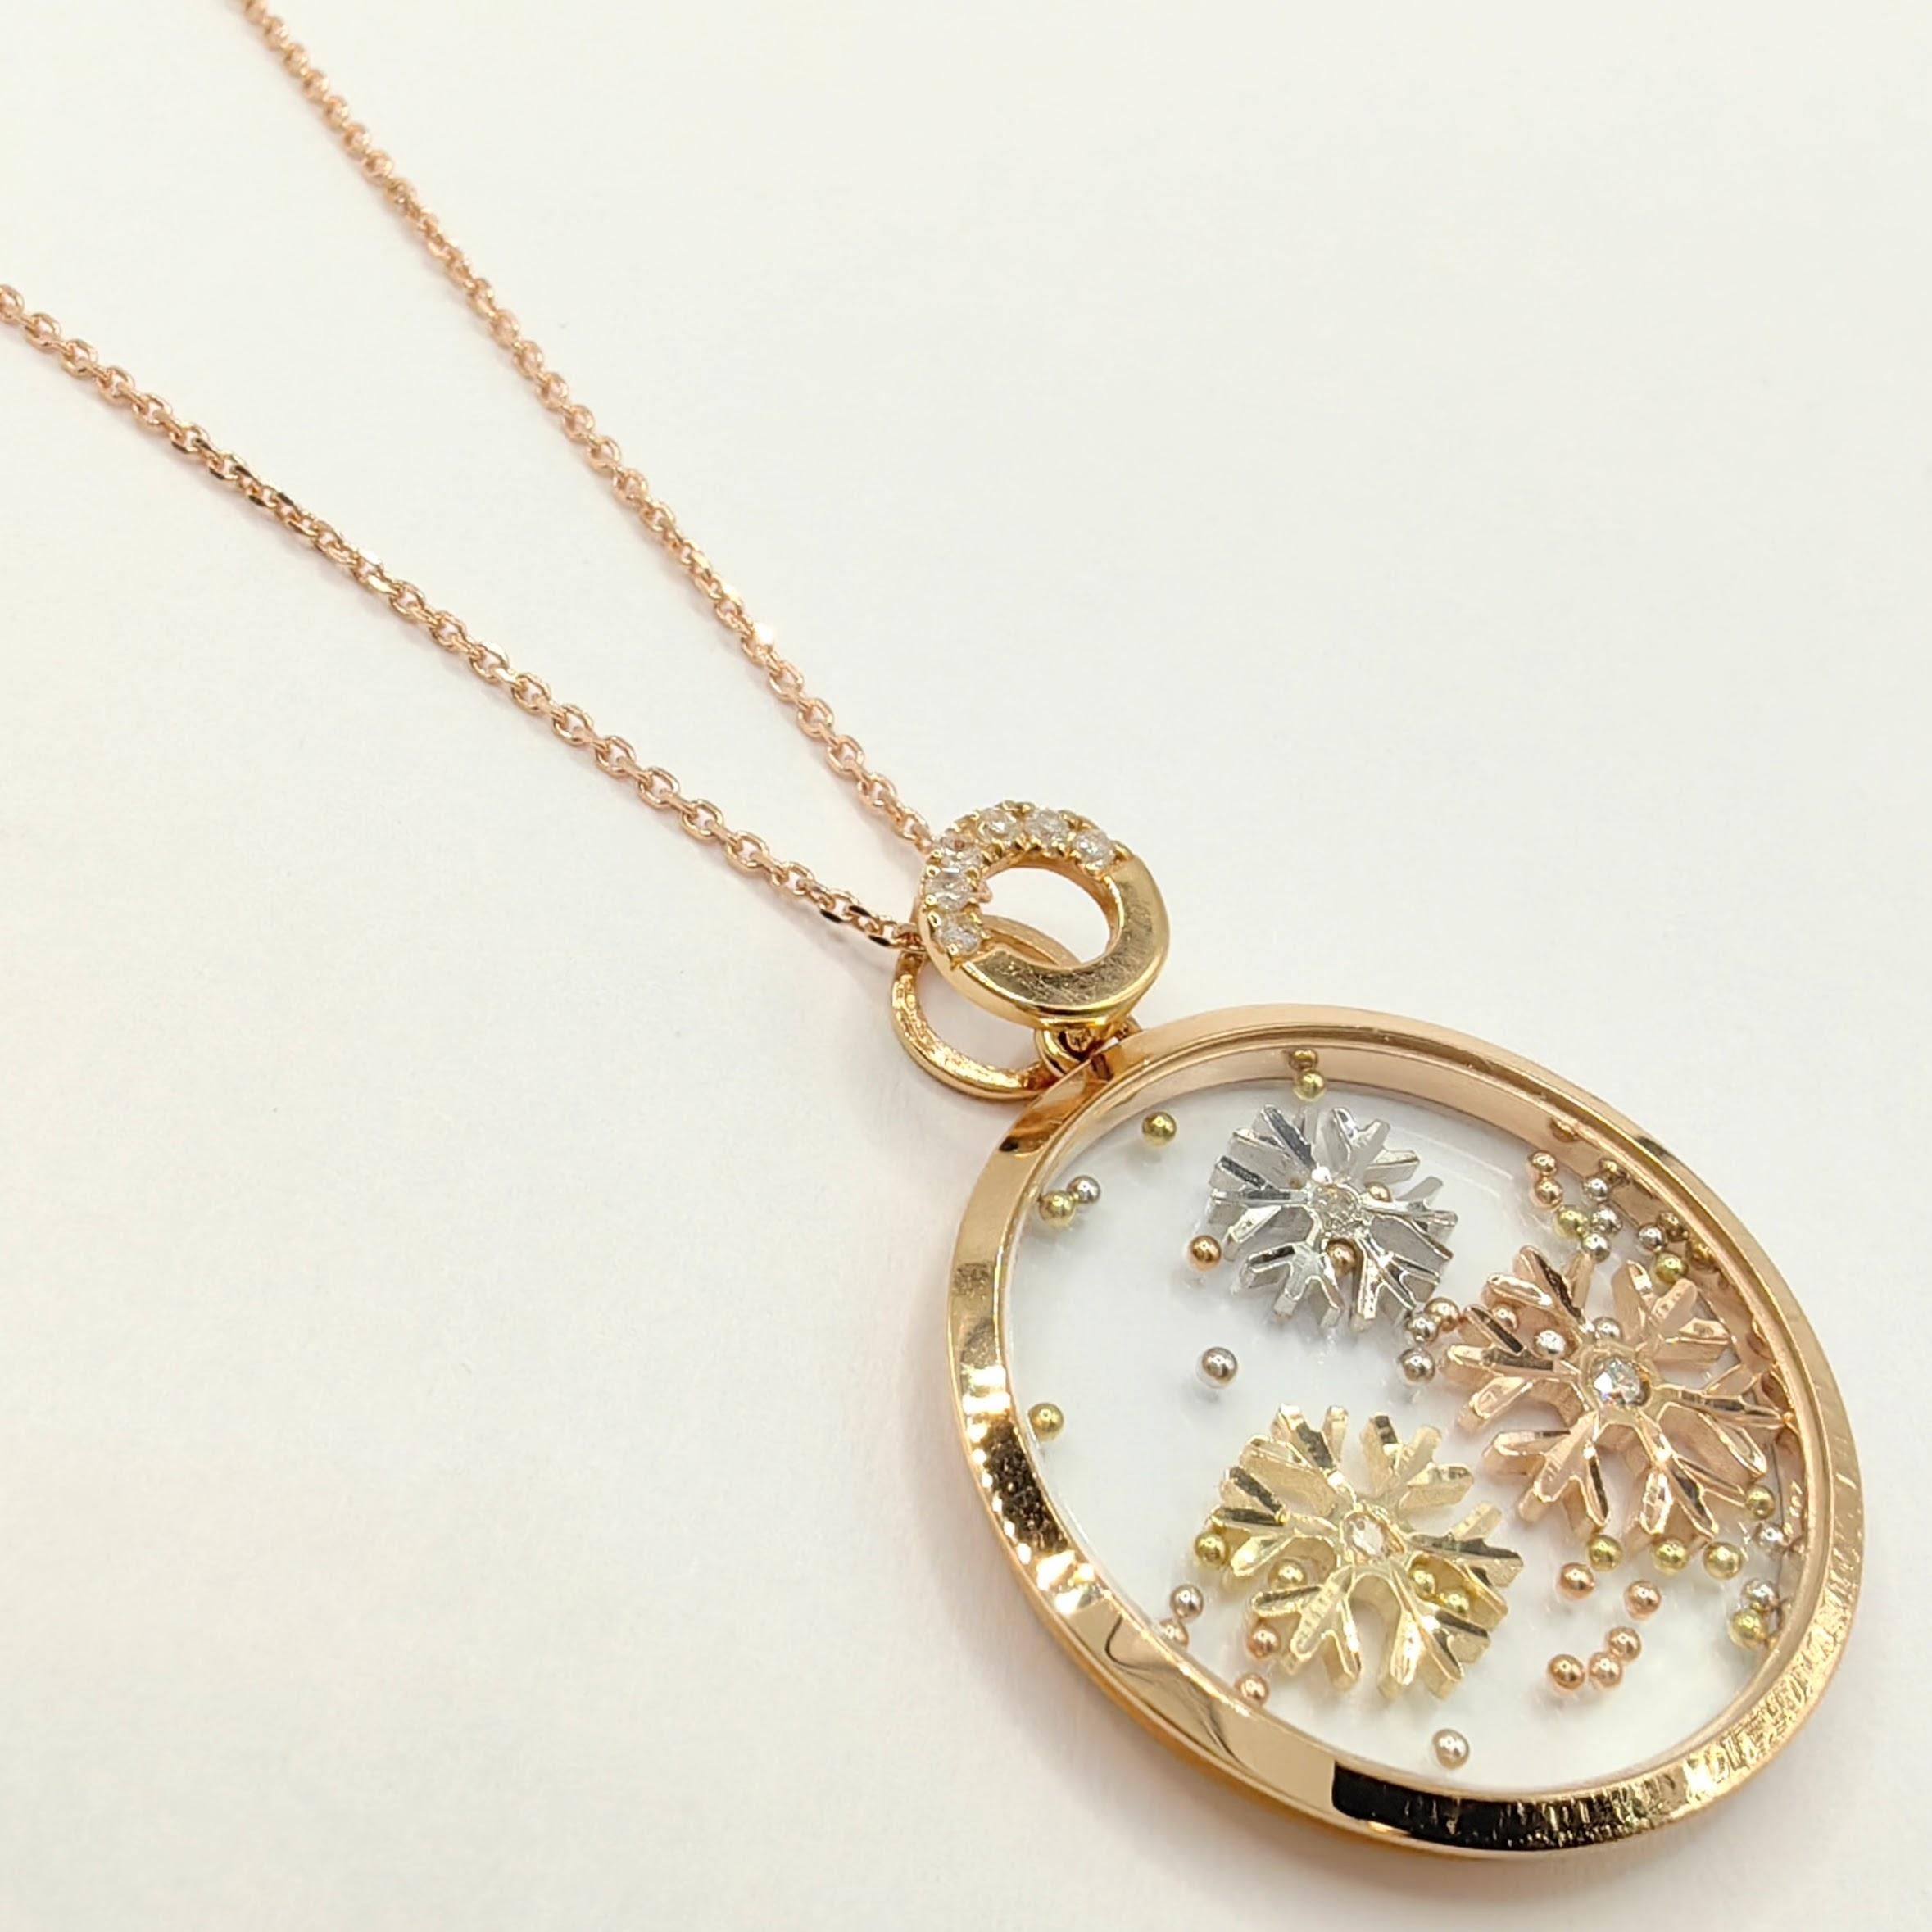 Brilliant Cut Happy Diamonds Snowflakes Pendant Necklace in 18K Rose, Yellow & White Gold For Sale